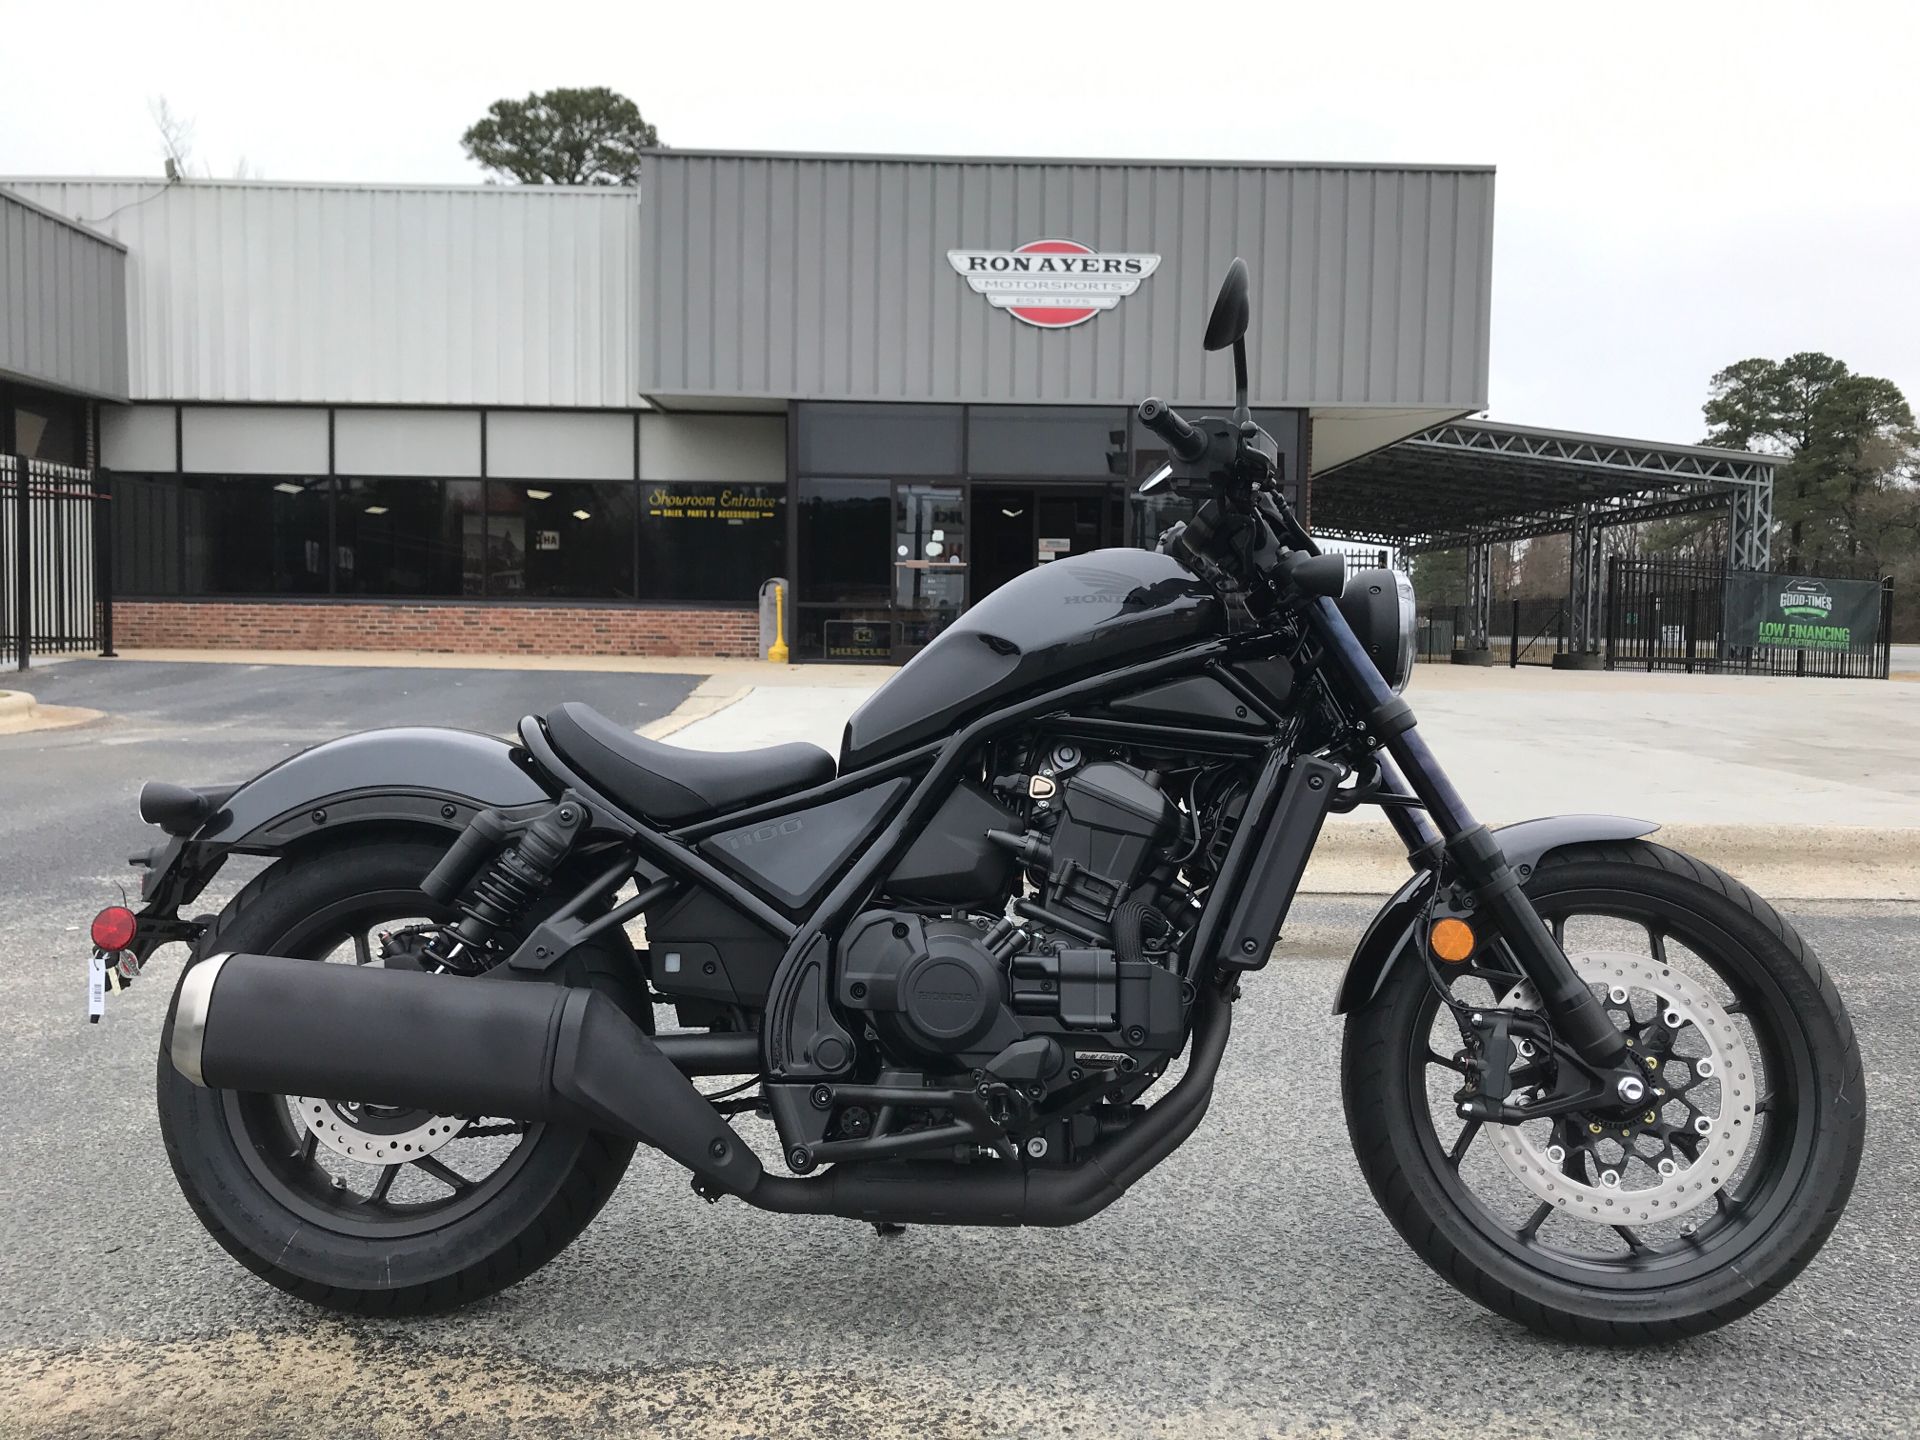 The New Honda Rebel 1100 Will Be A Game Changer